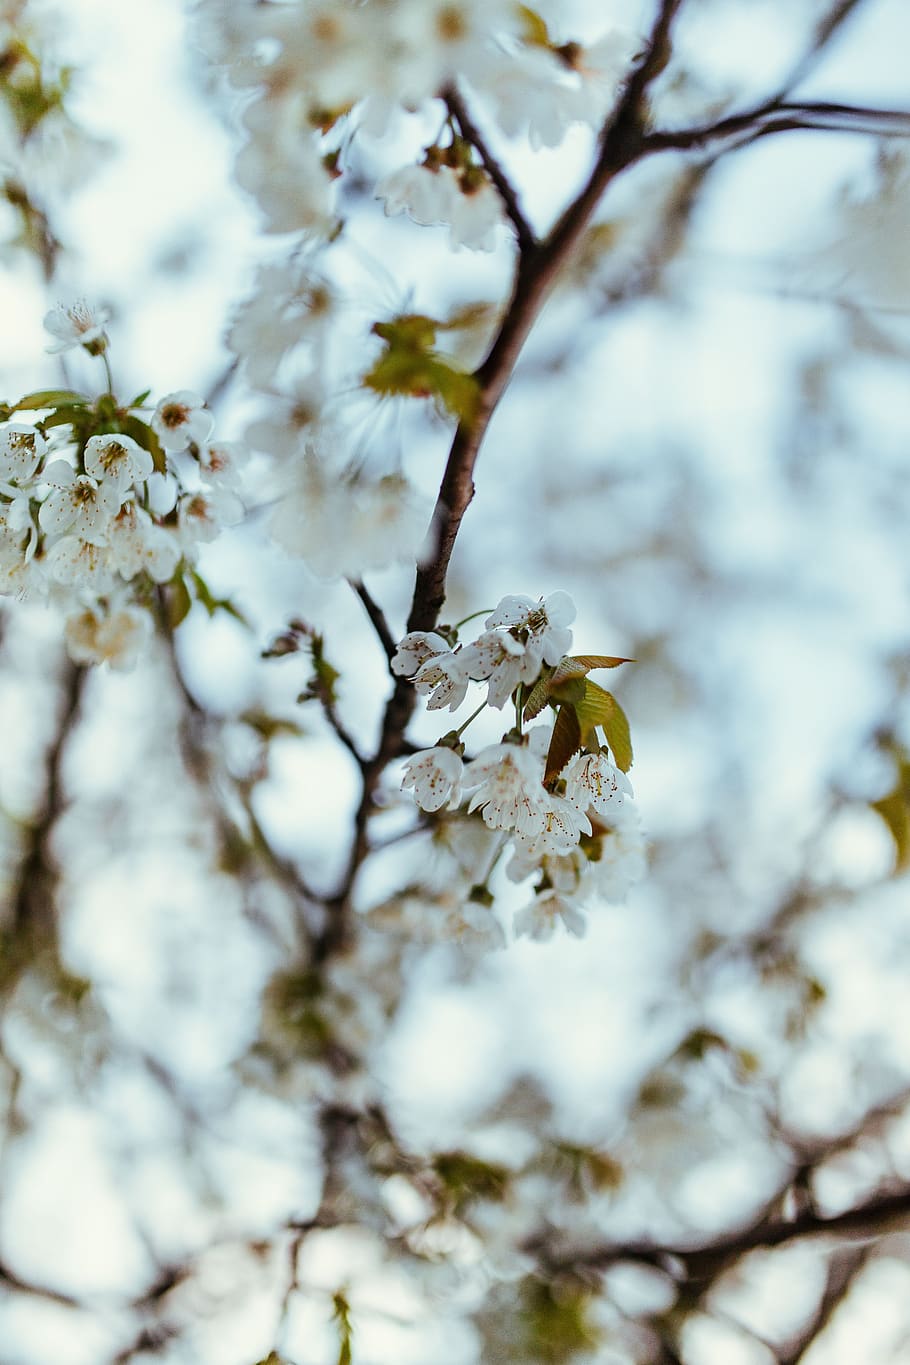 flowers, leaves, trees, branch, Little, plant, tree, fragility, growth, flower